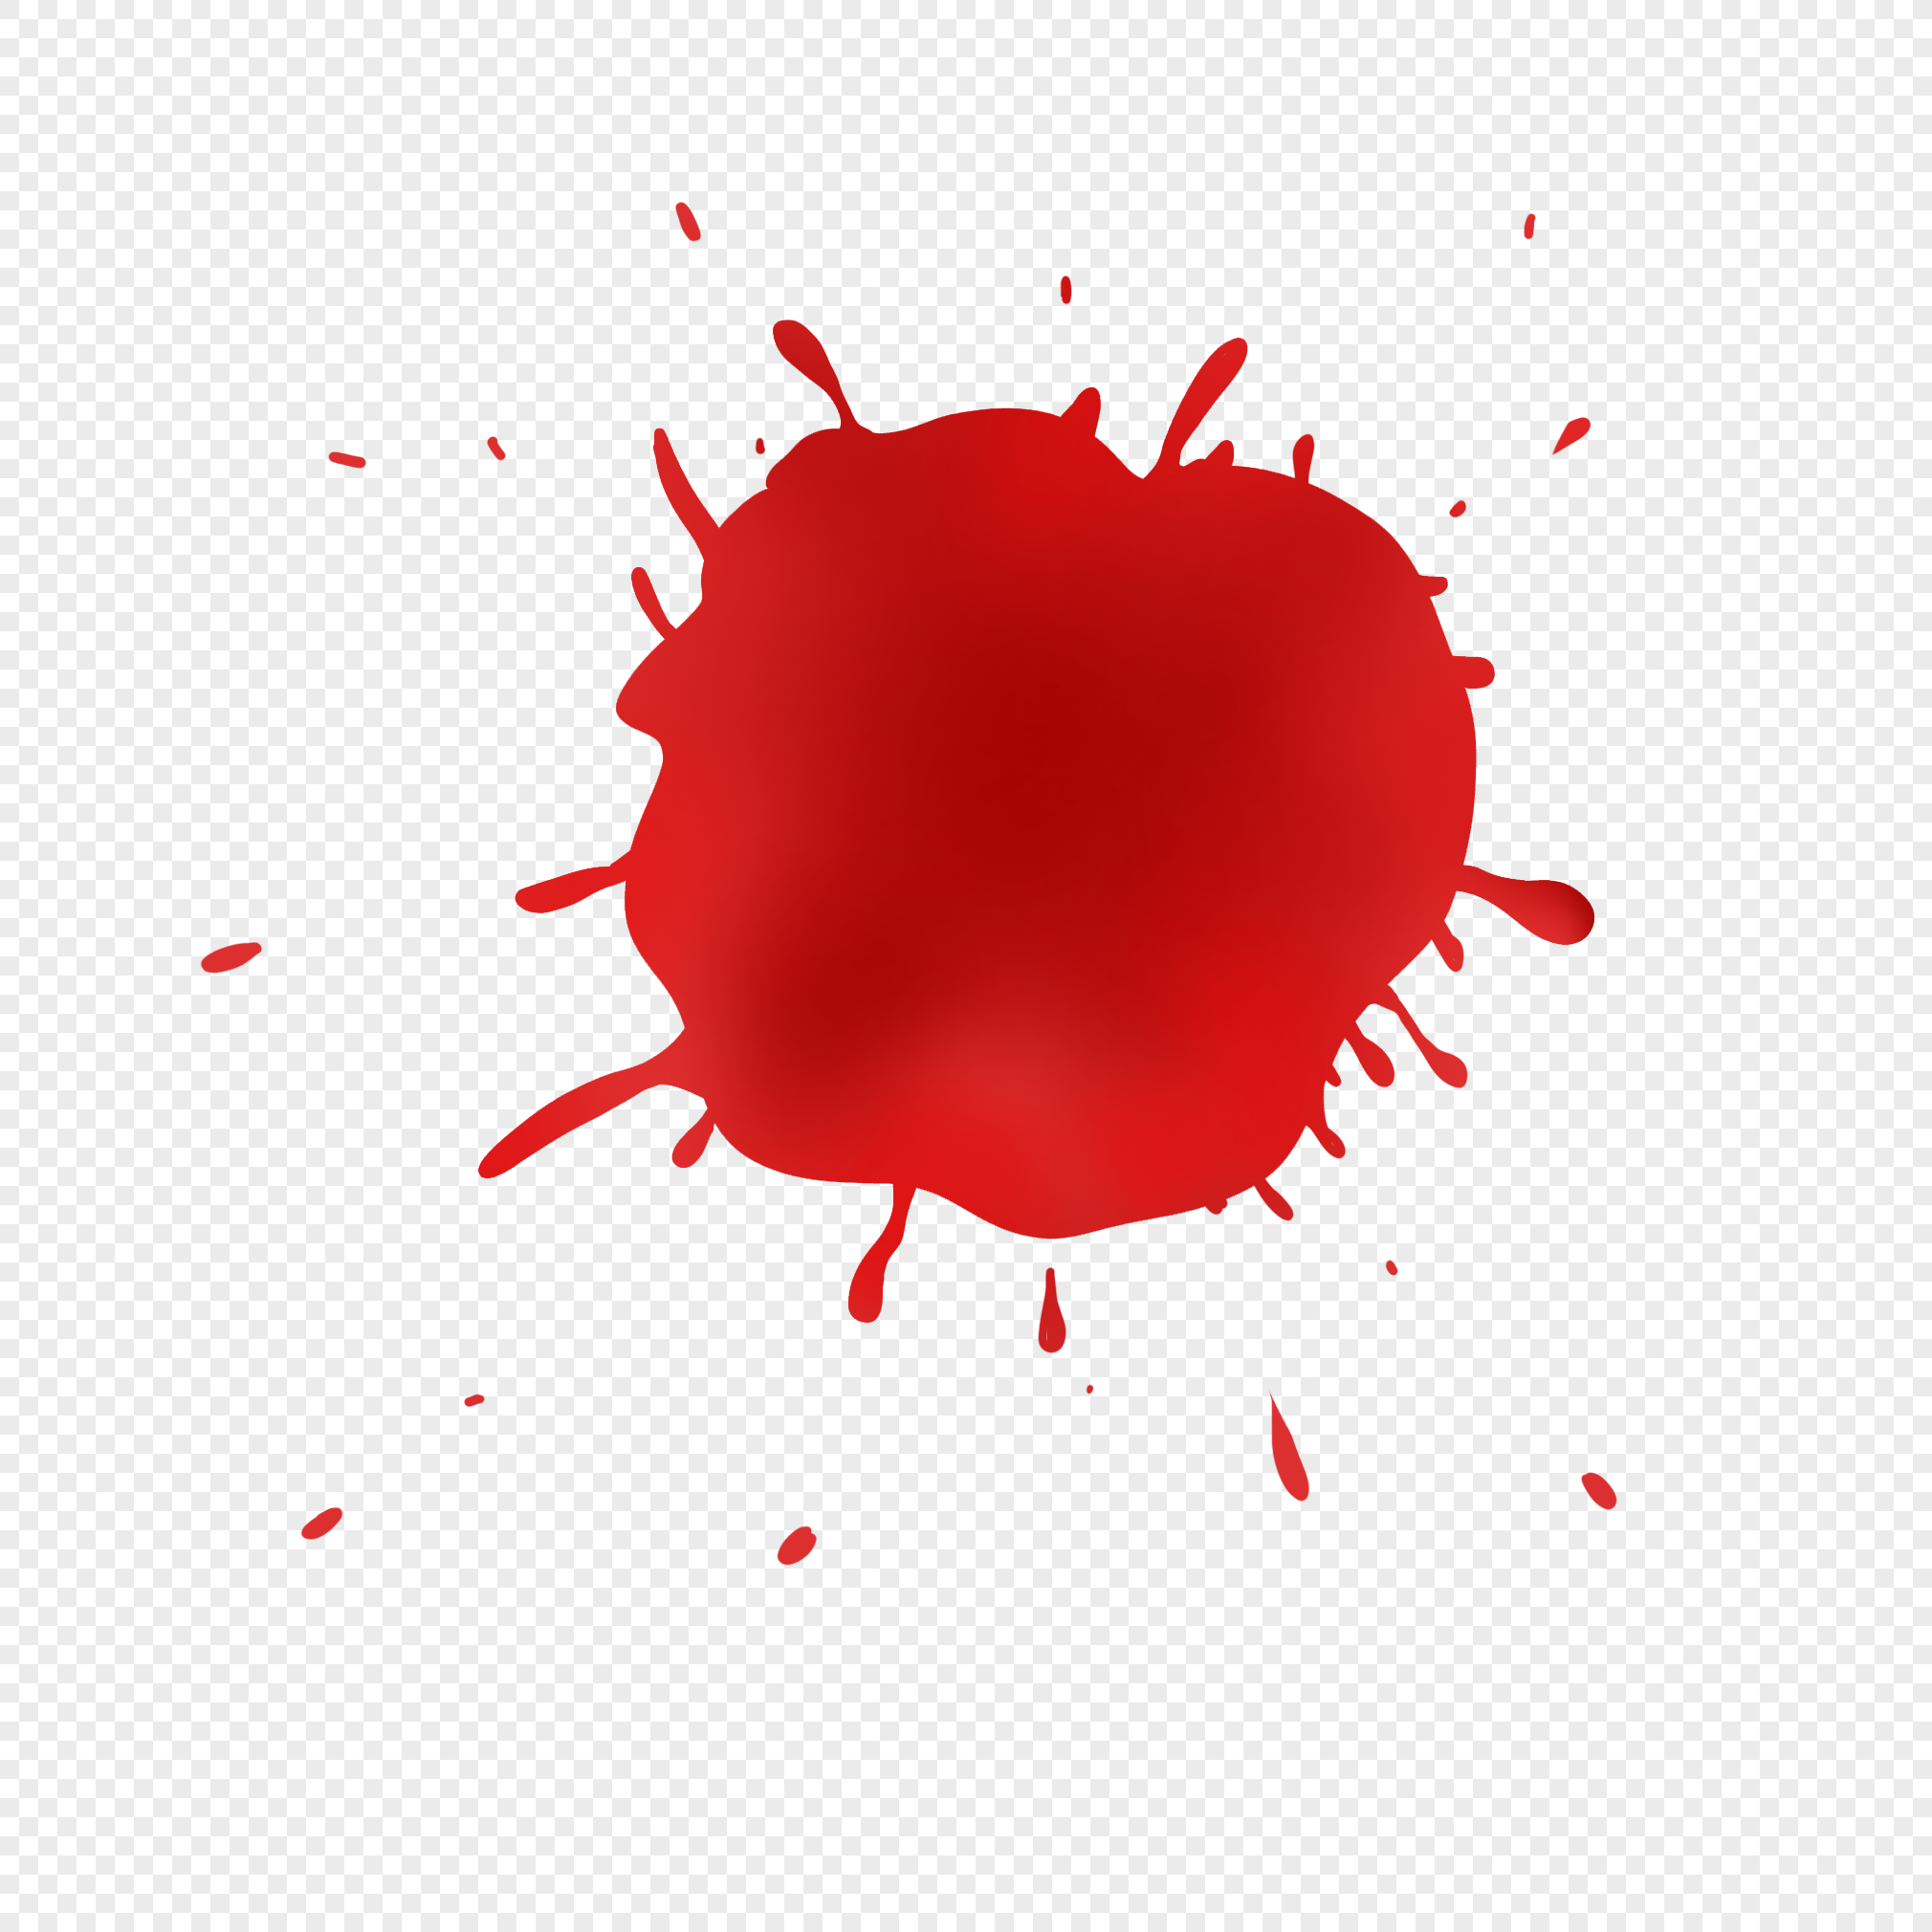 Red Blood Stains Png Image And Psd File Free Download Lovepik 401498824